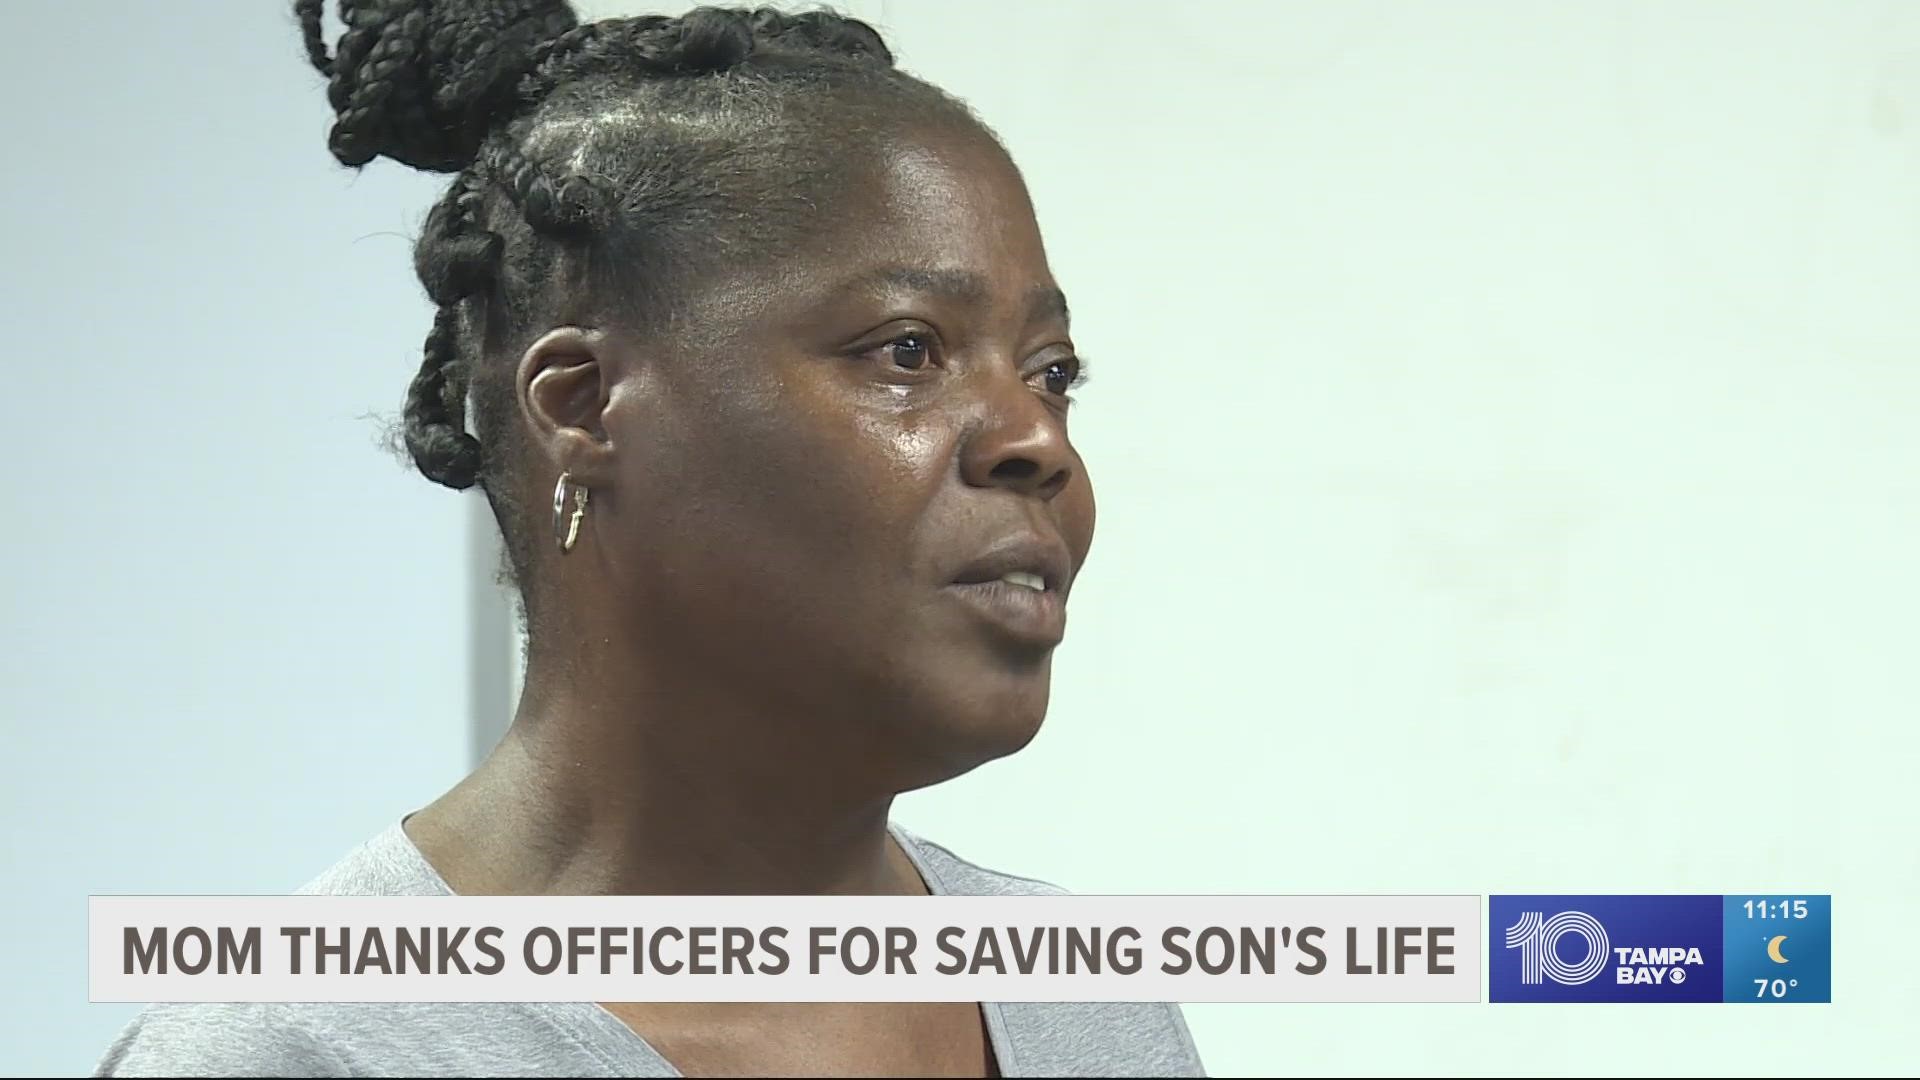 The mother of Tyriek Washington said thank you to the five Haines City officers who saved his life last week.